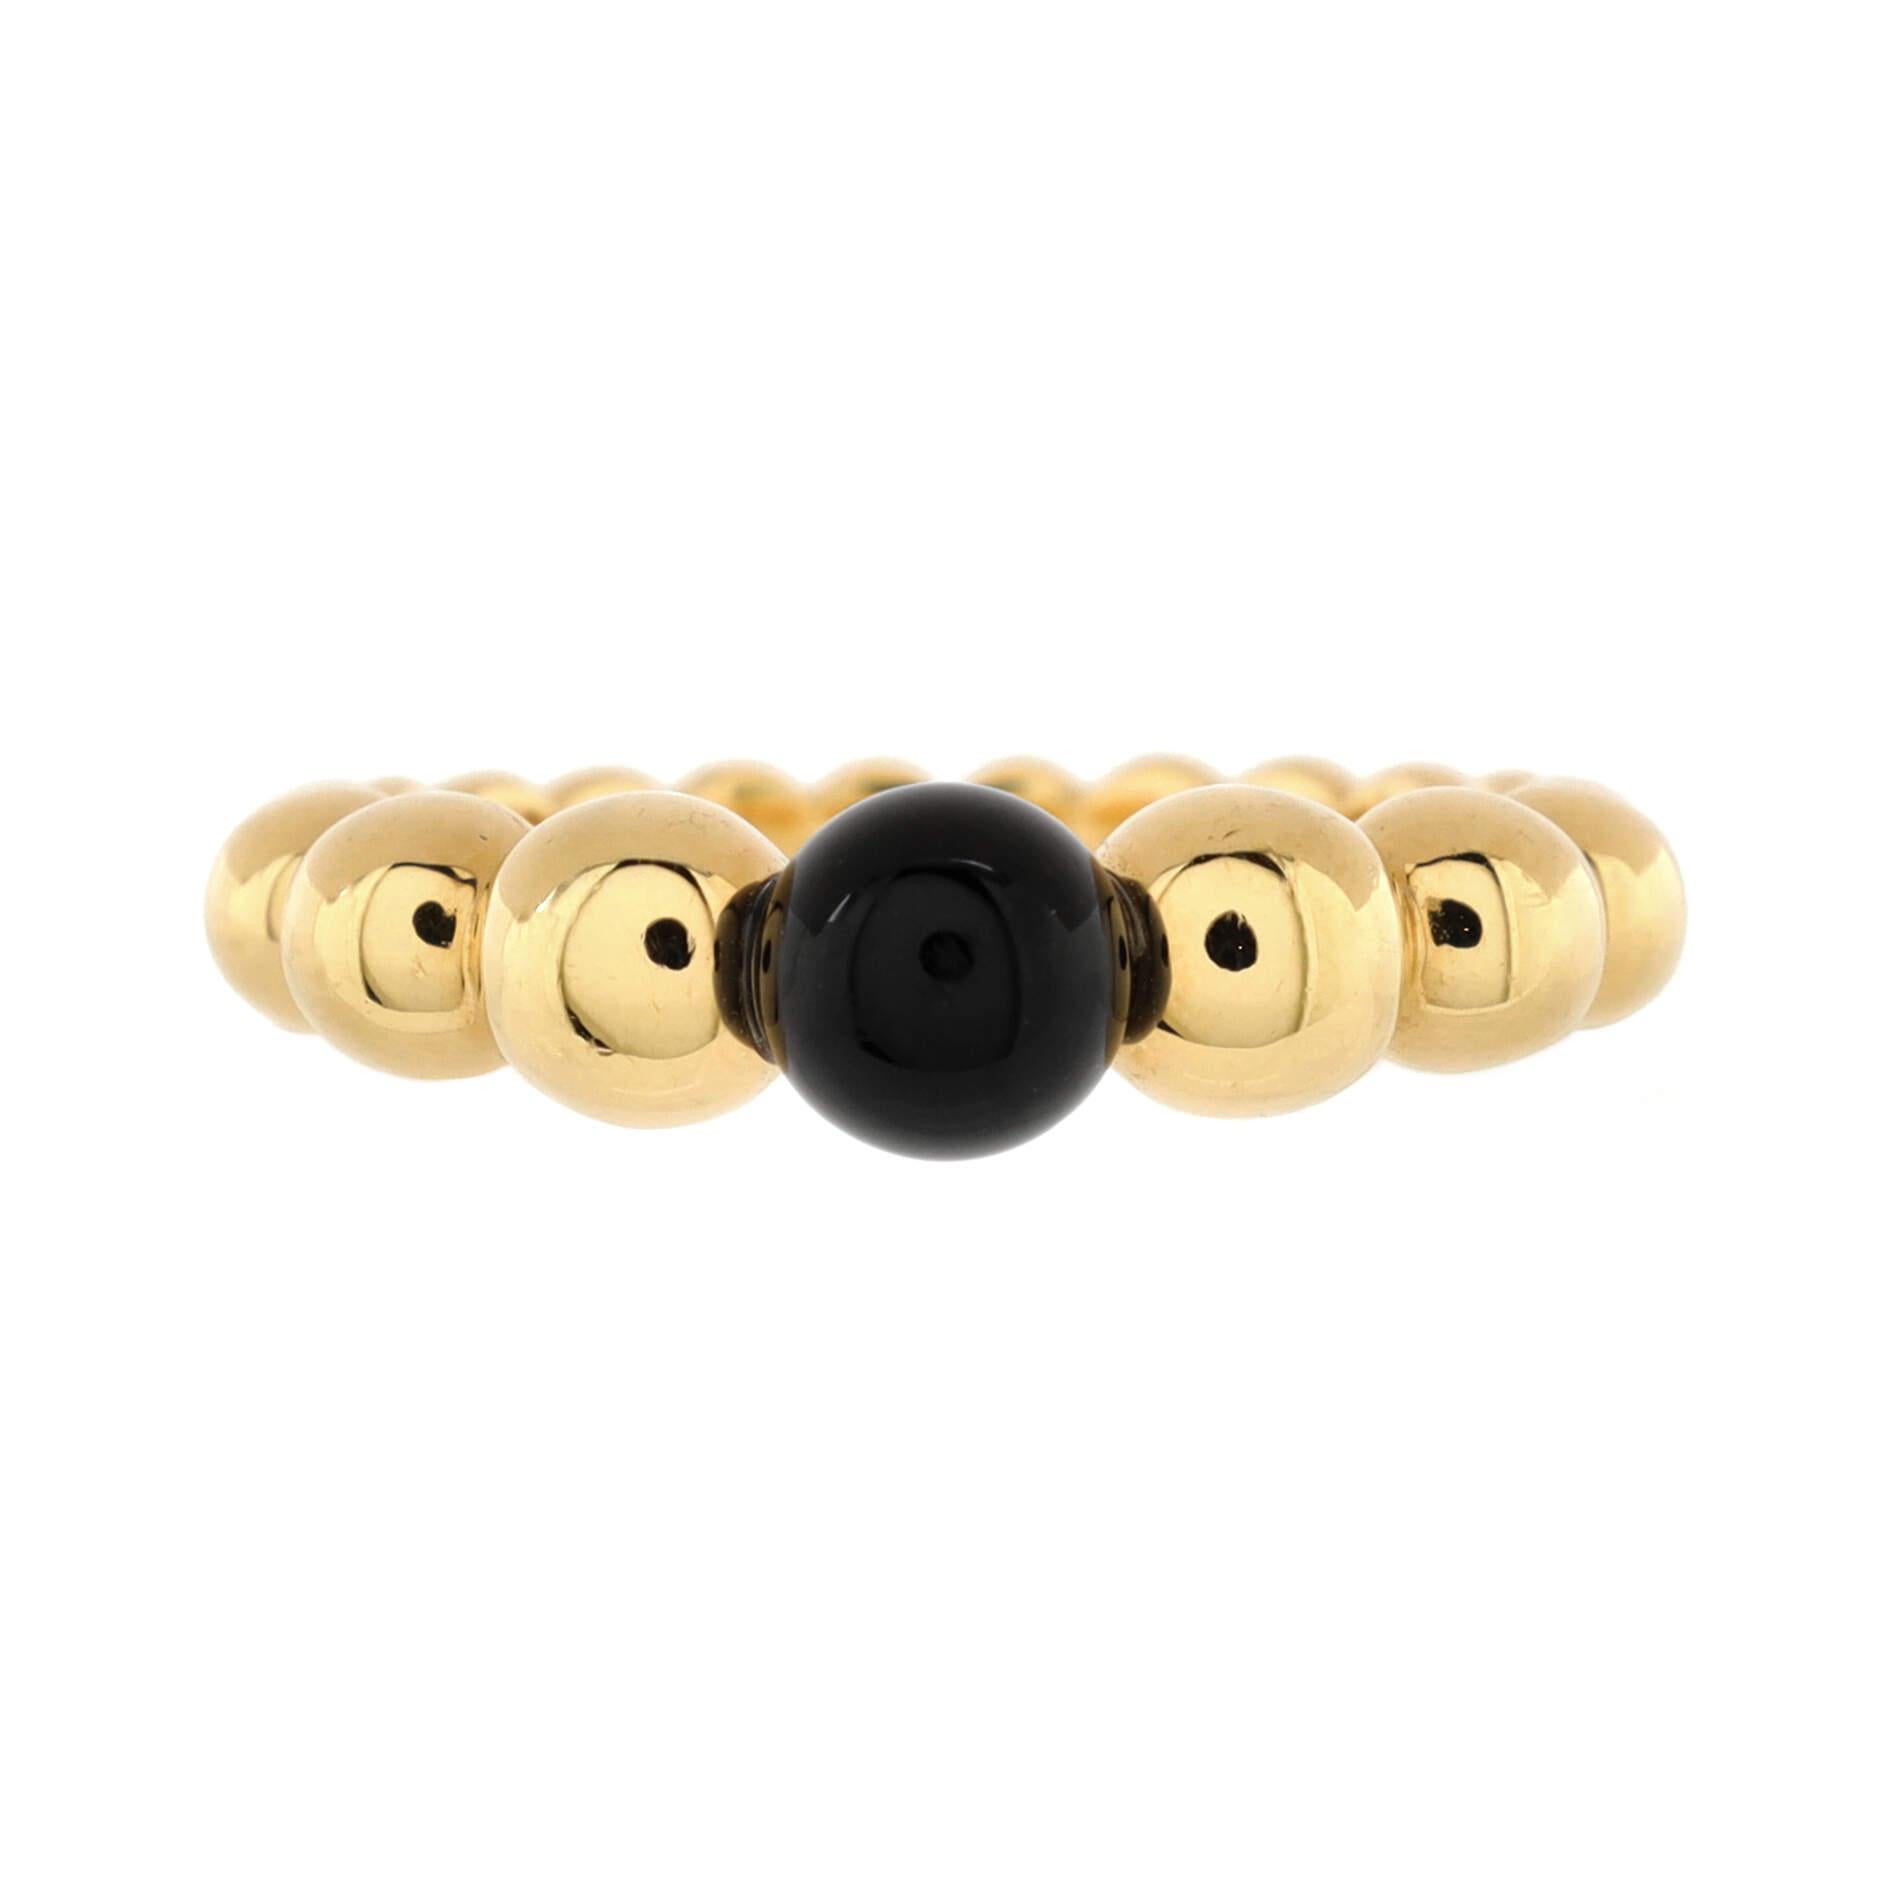 Condition: Great. Minor wear throughout.
Accessories: No Accessories
Measurements: Size: 6.75 - 54, Width: 2.55 mm
Designer: Van Cleef & Arpels
Model: Perlee Couleurs Variation Ring 18K Yellow Gold with Onyx
Exterior Color: Yellow Gold
Item Number: